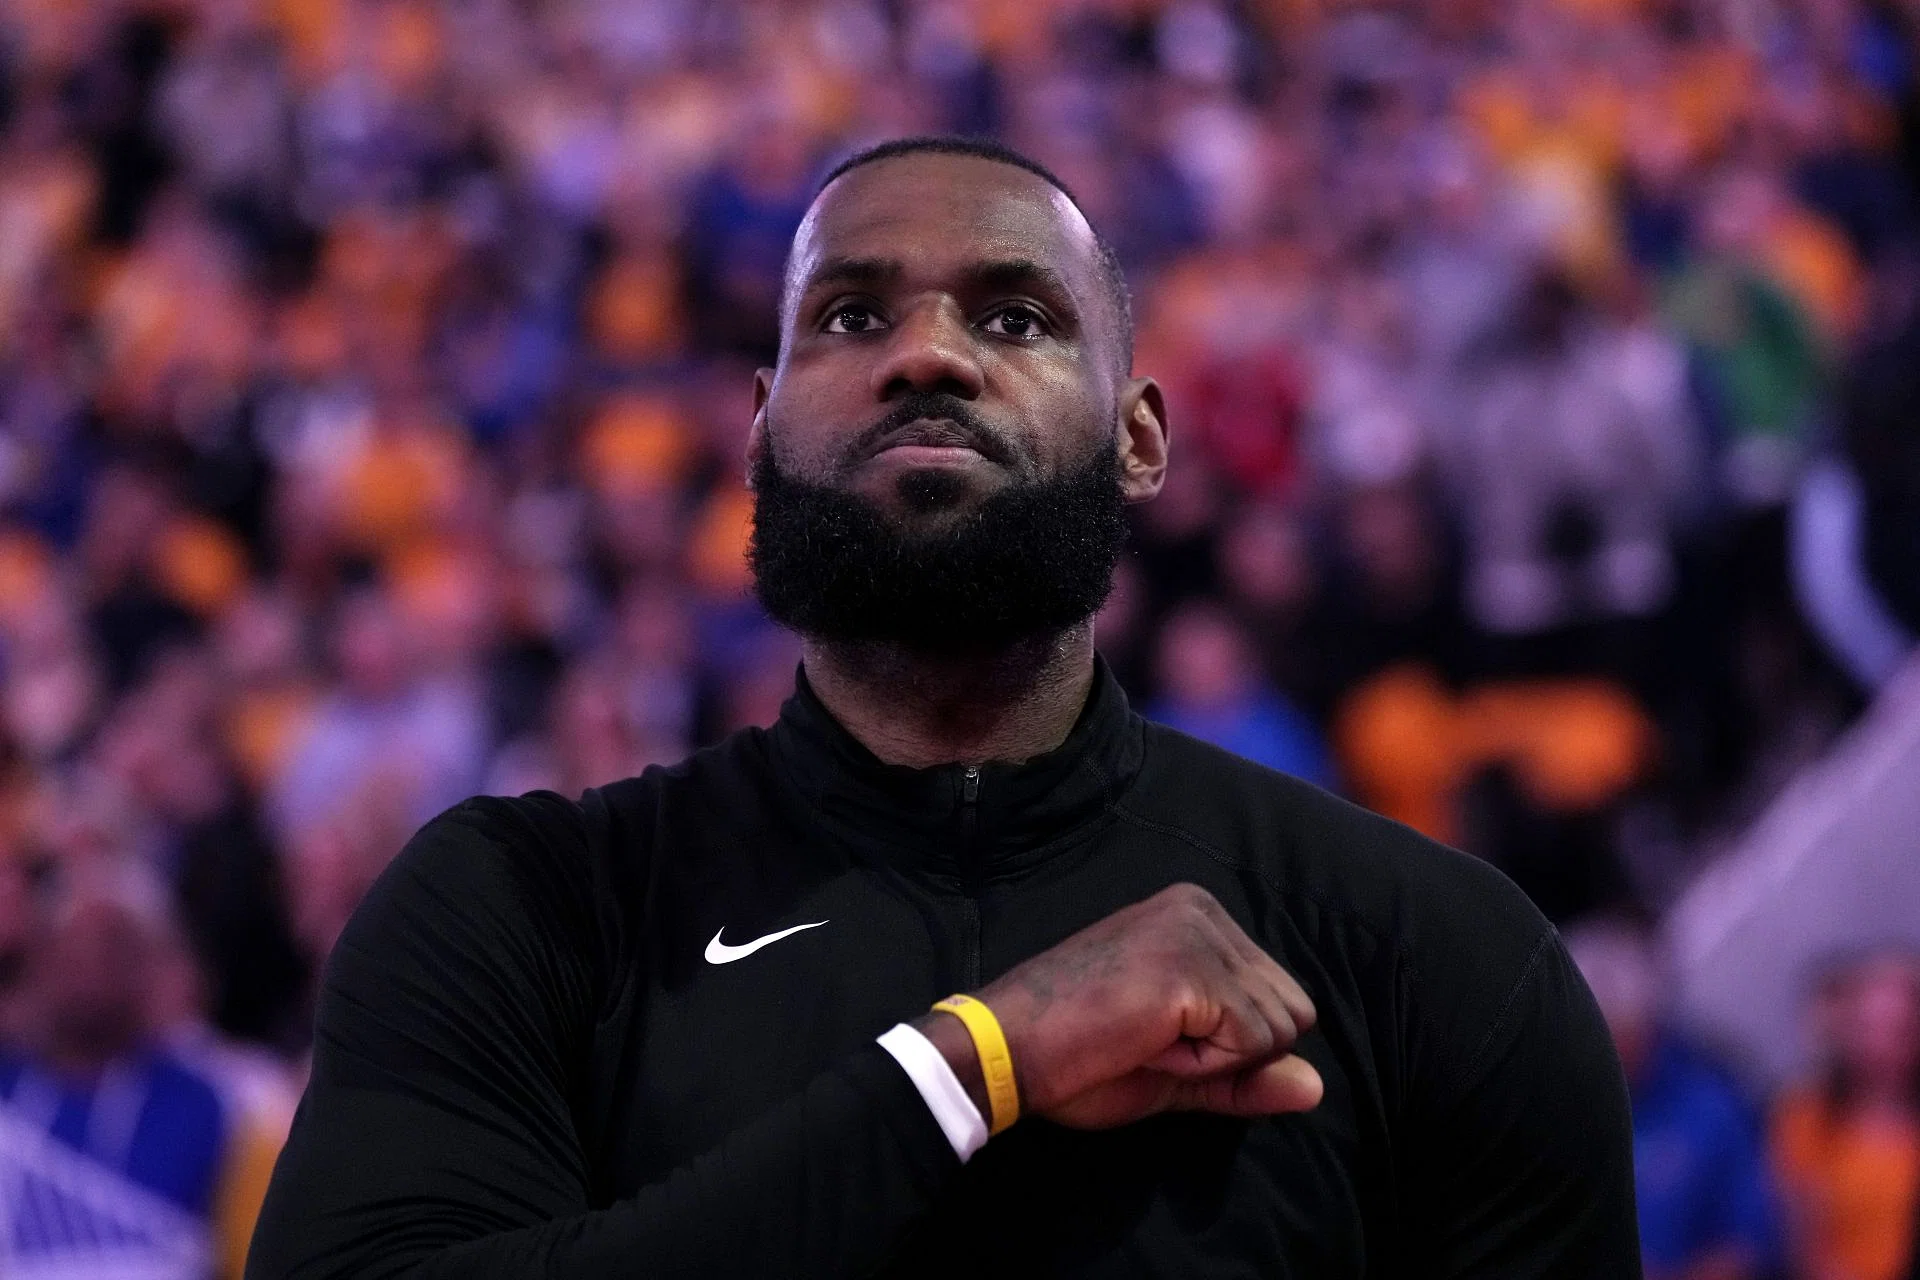 How many NBA teams has LeBron James played for in his career?